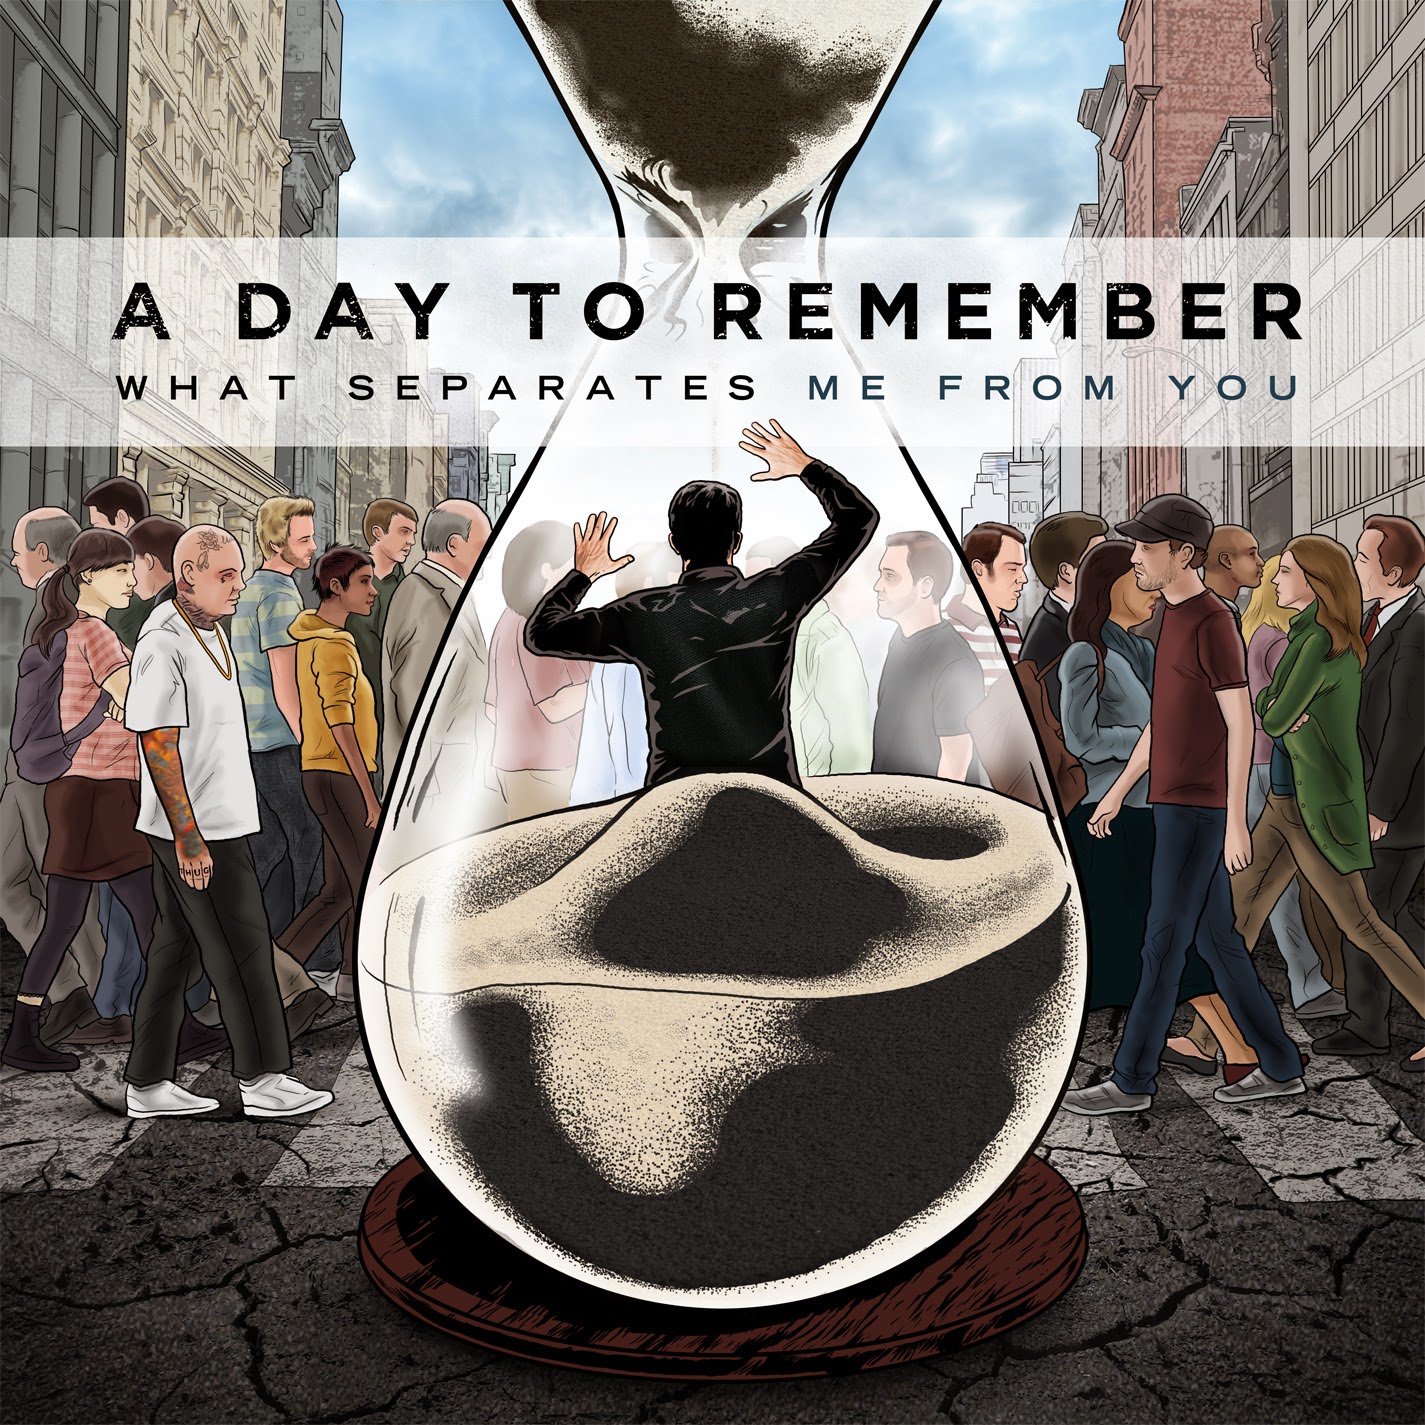 A Day To Remember, Old Record Full Album Zip